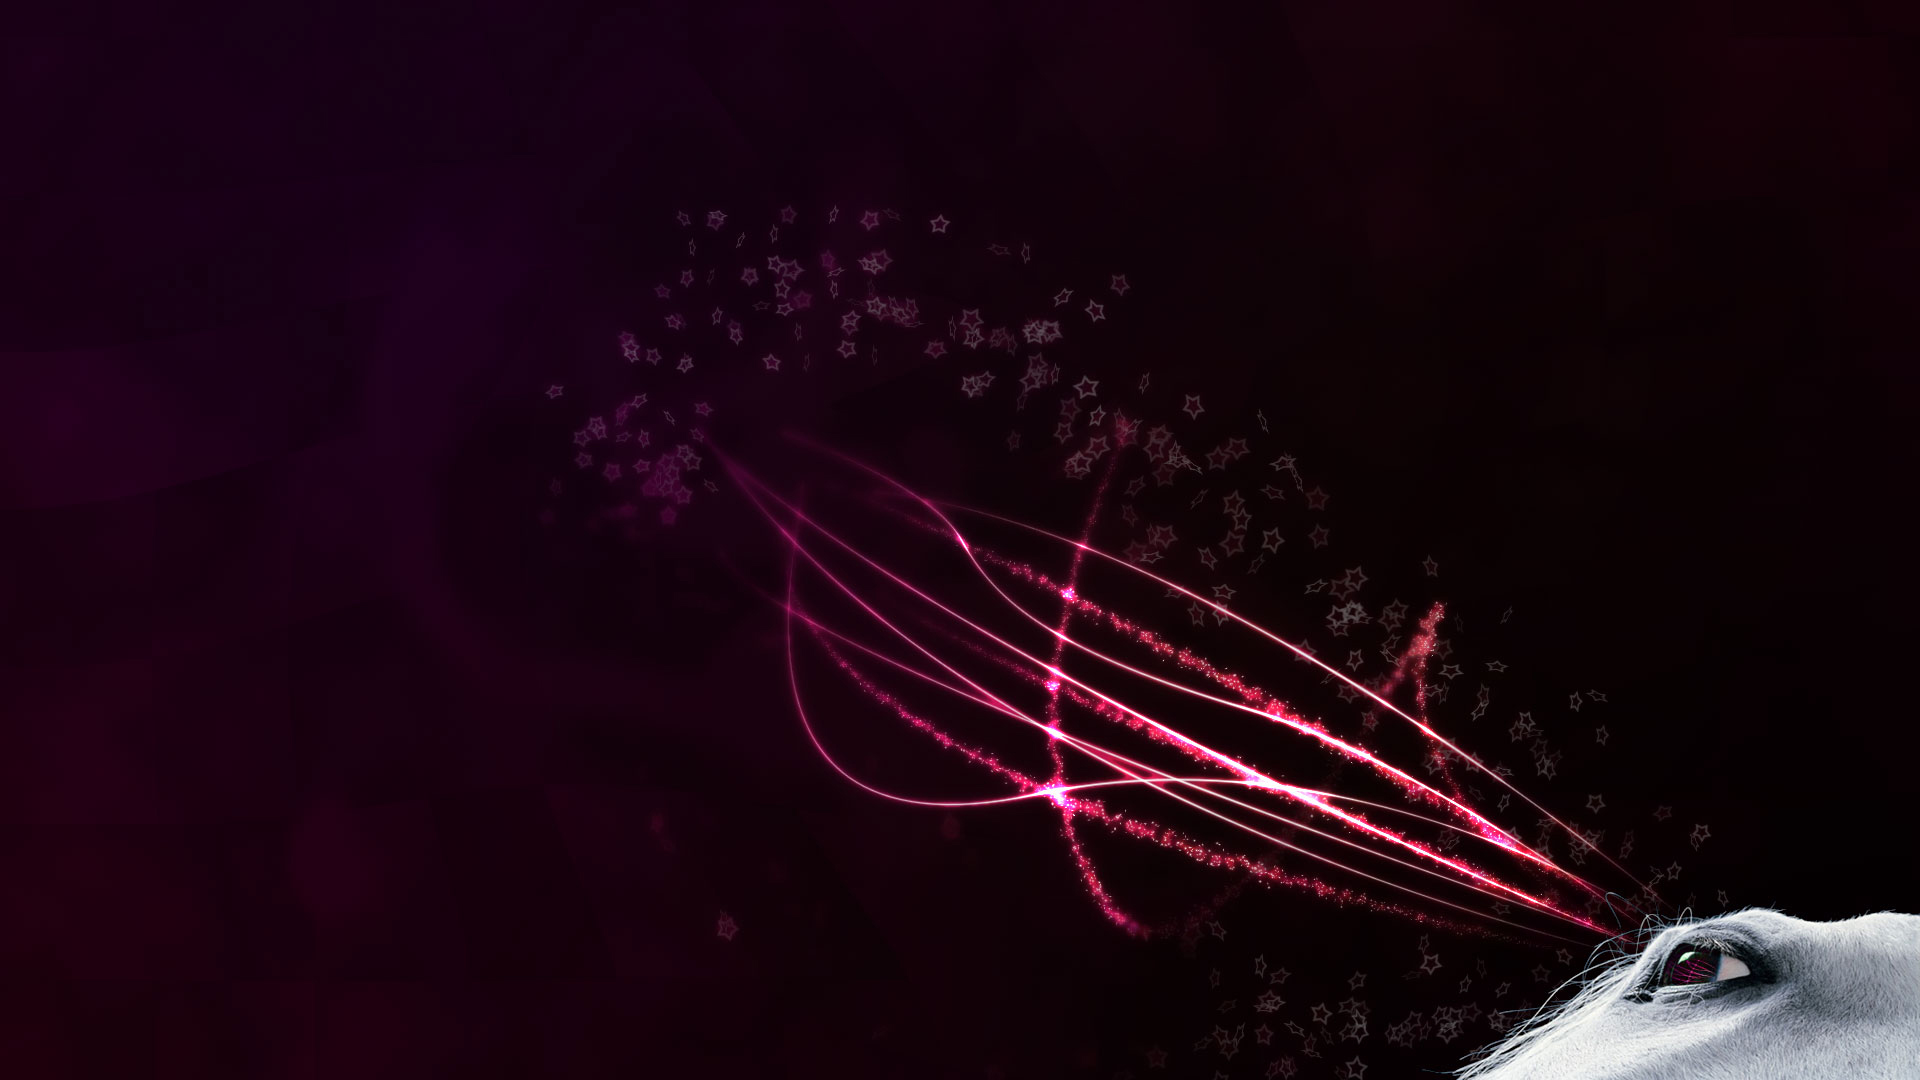 Download full size light jet Abstract wallpaper / 1920x1080